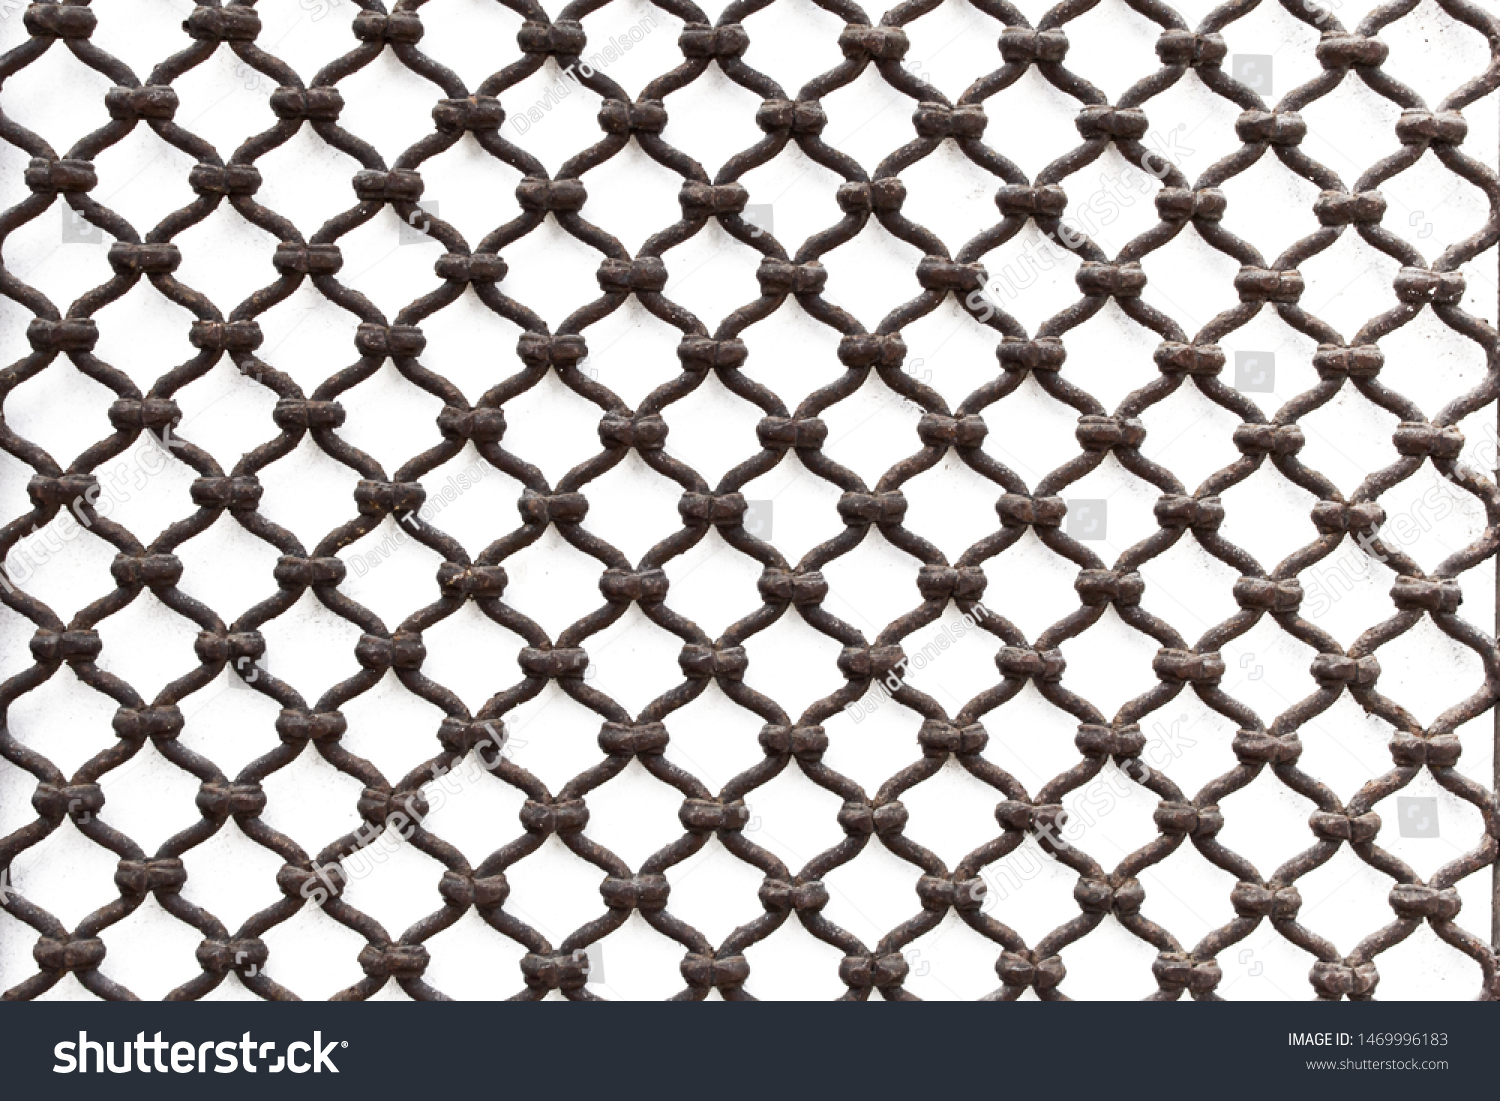 antique wire fence